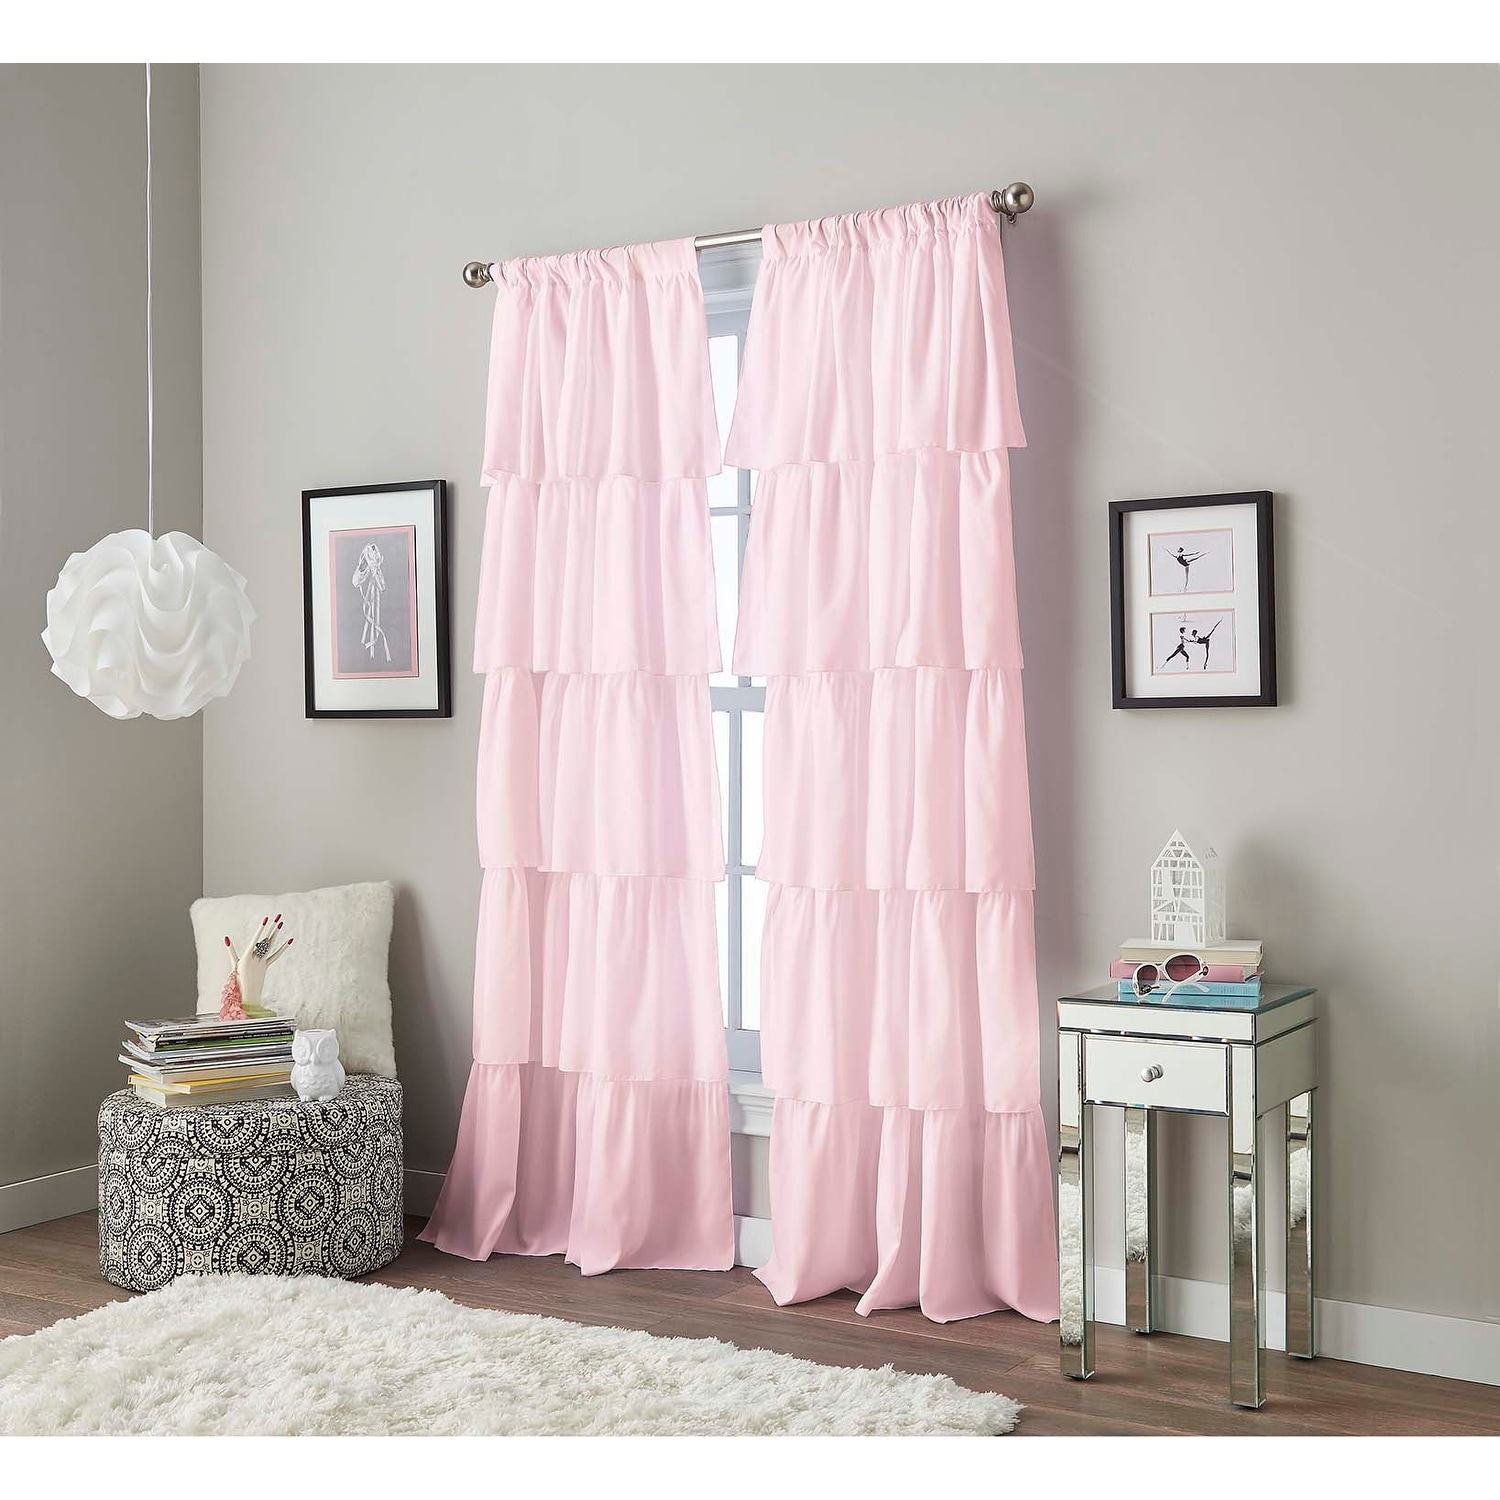 SOFT MULTILAYERS VOILE SHEER FABRIC WINDOW CURTAIN RUFFLE PANEL 1PC GYPSY PINK 